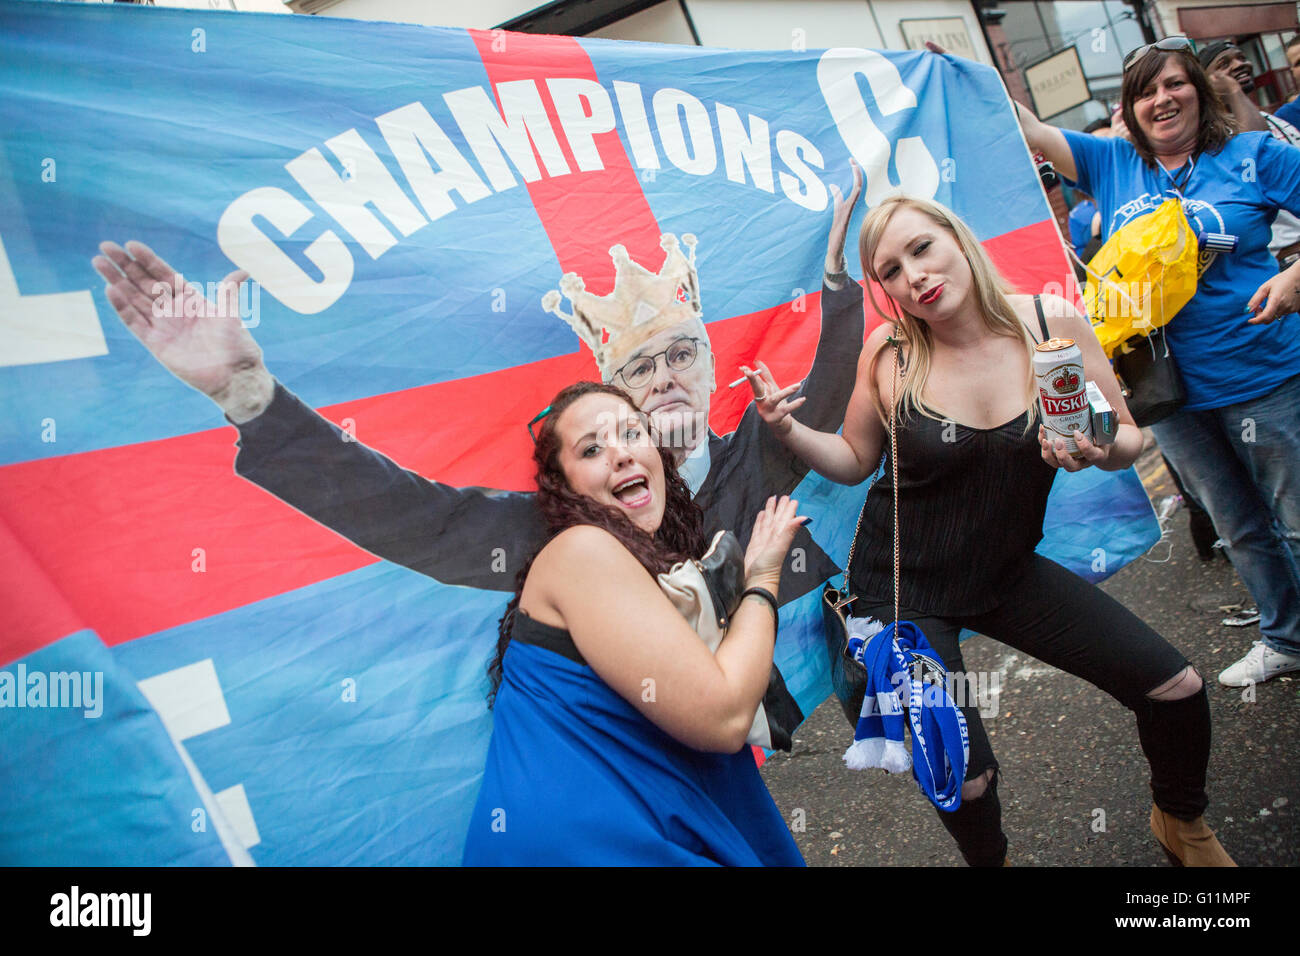 Leicester City, England, May 7th 2016. The title party is in full swing all over Leicester City after the stunning achievement winning the Premier League 2015/2016. Party atmosphere all over Leicester City with proud fans in Leicester FC fan gear. Credit:  Alberto Grasso/Alamy Live News Stock Photo